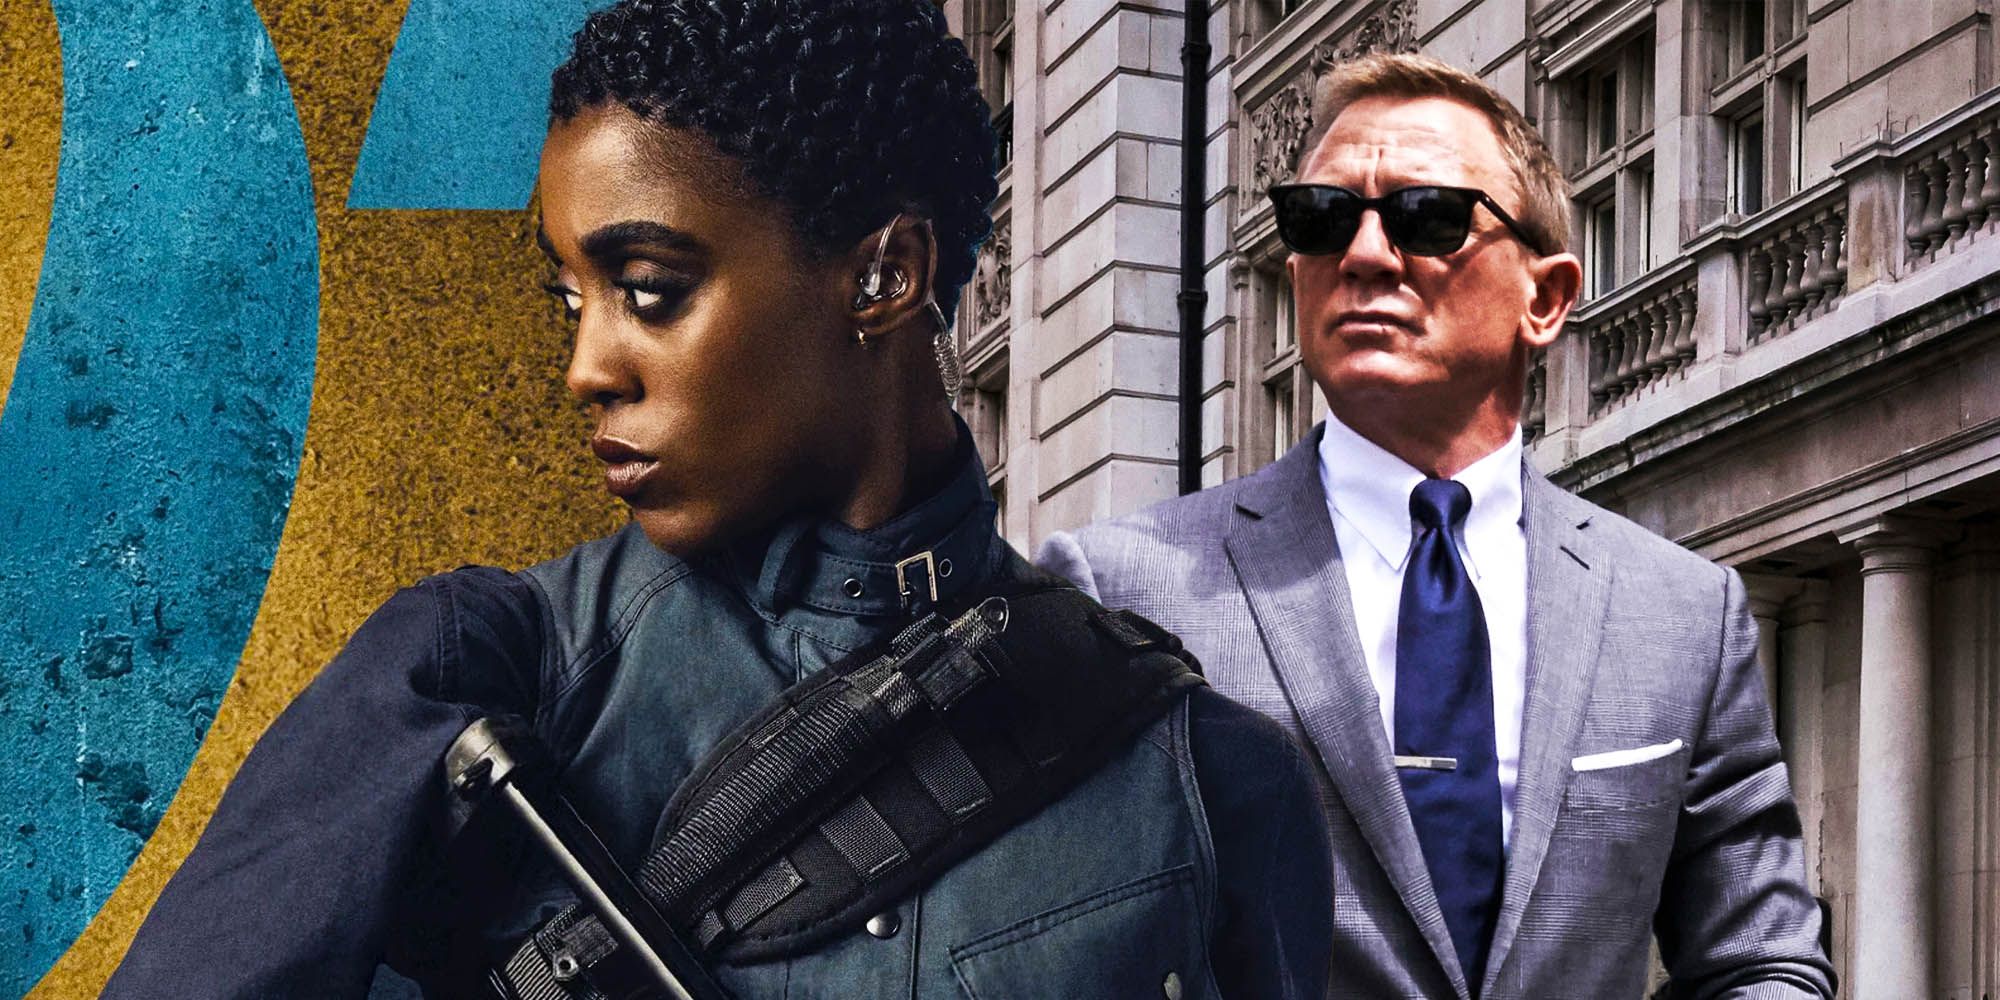 James Bond: The next 007 will be played by a woman